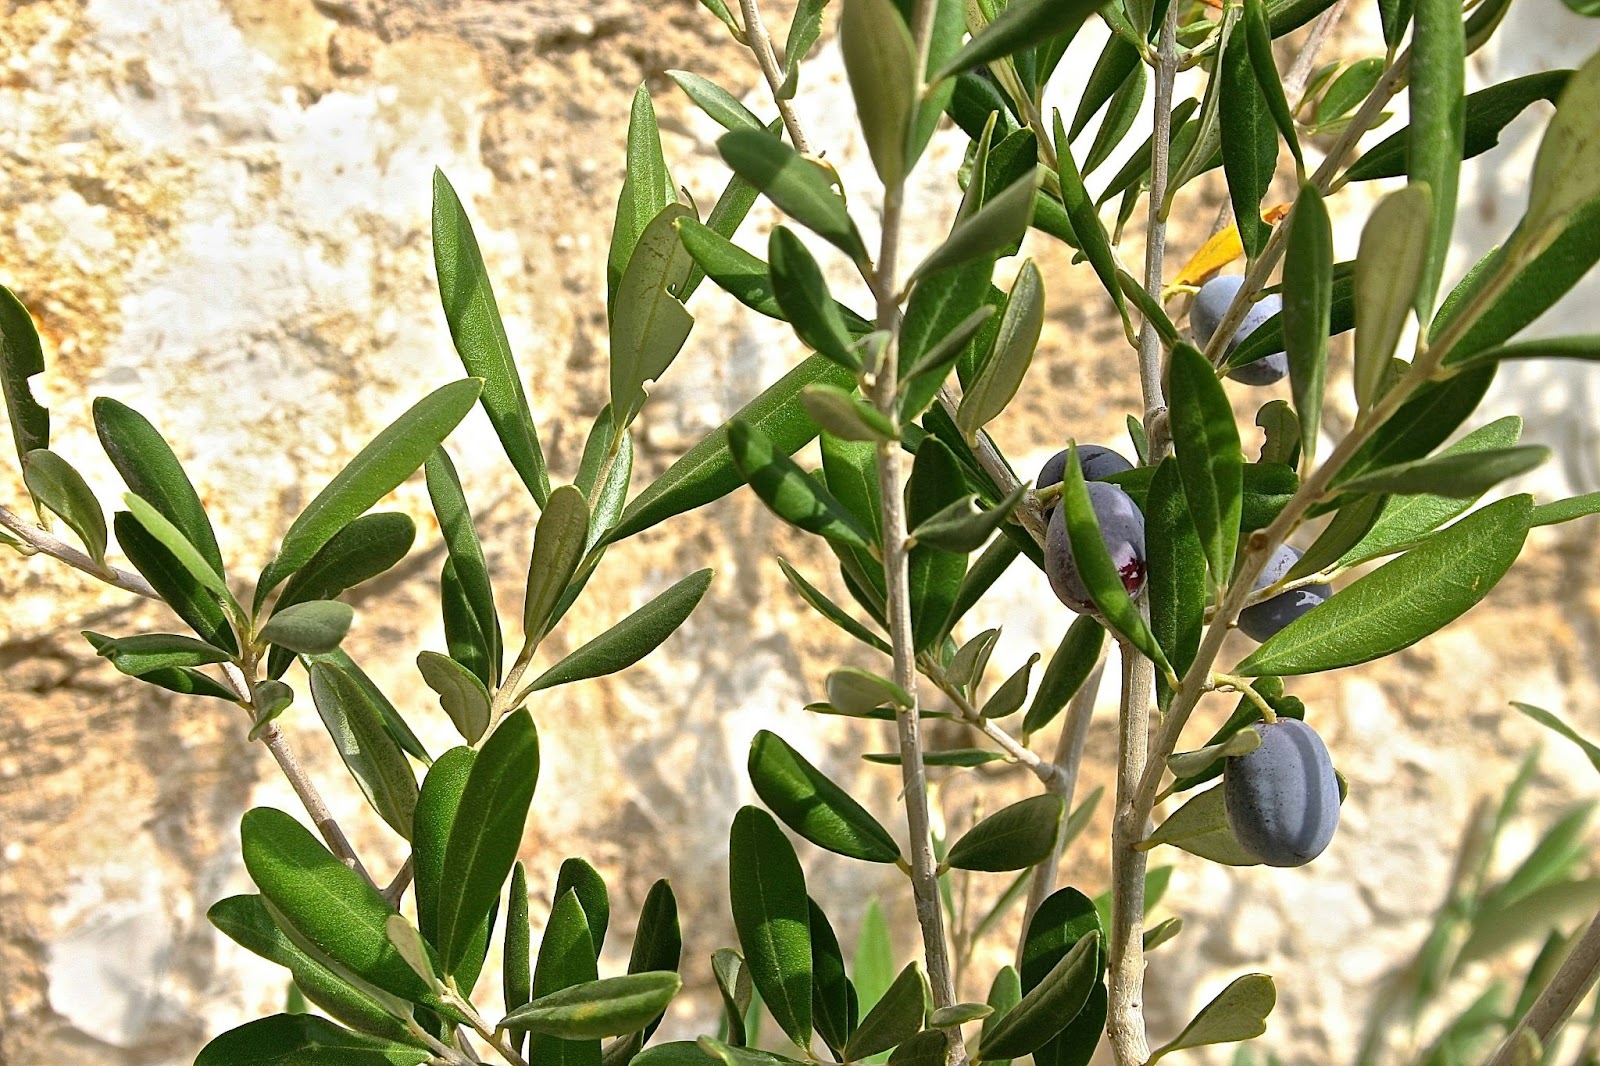 The olive harvest is an enjoyable and communal experience for tourists in fall. 
pictured: an olive tree in Greece